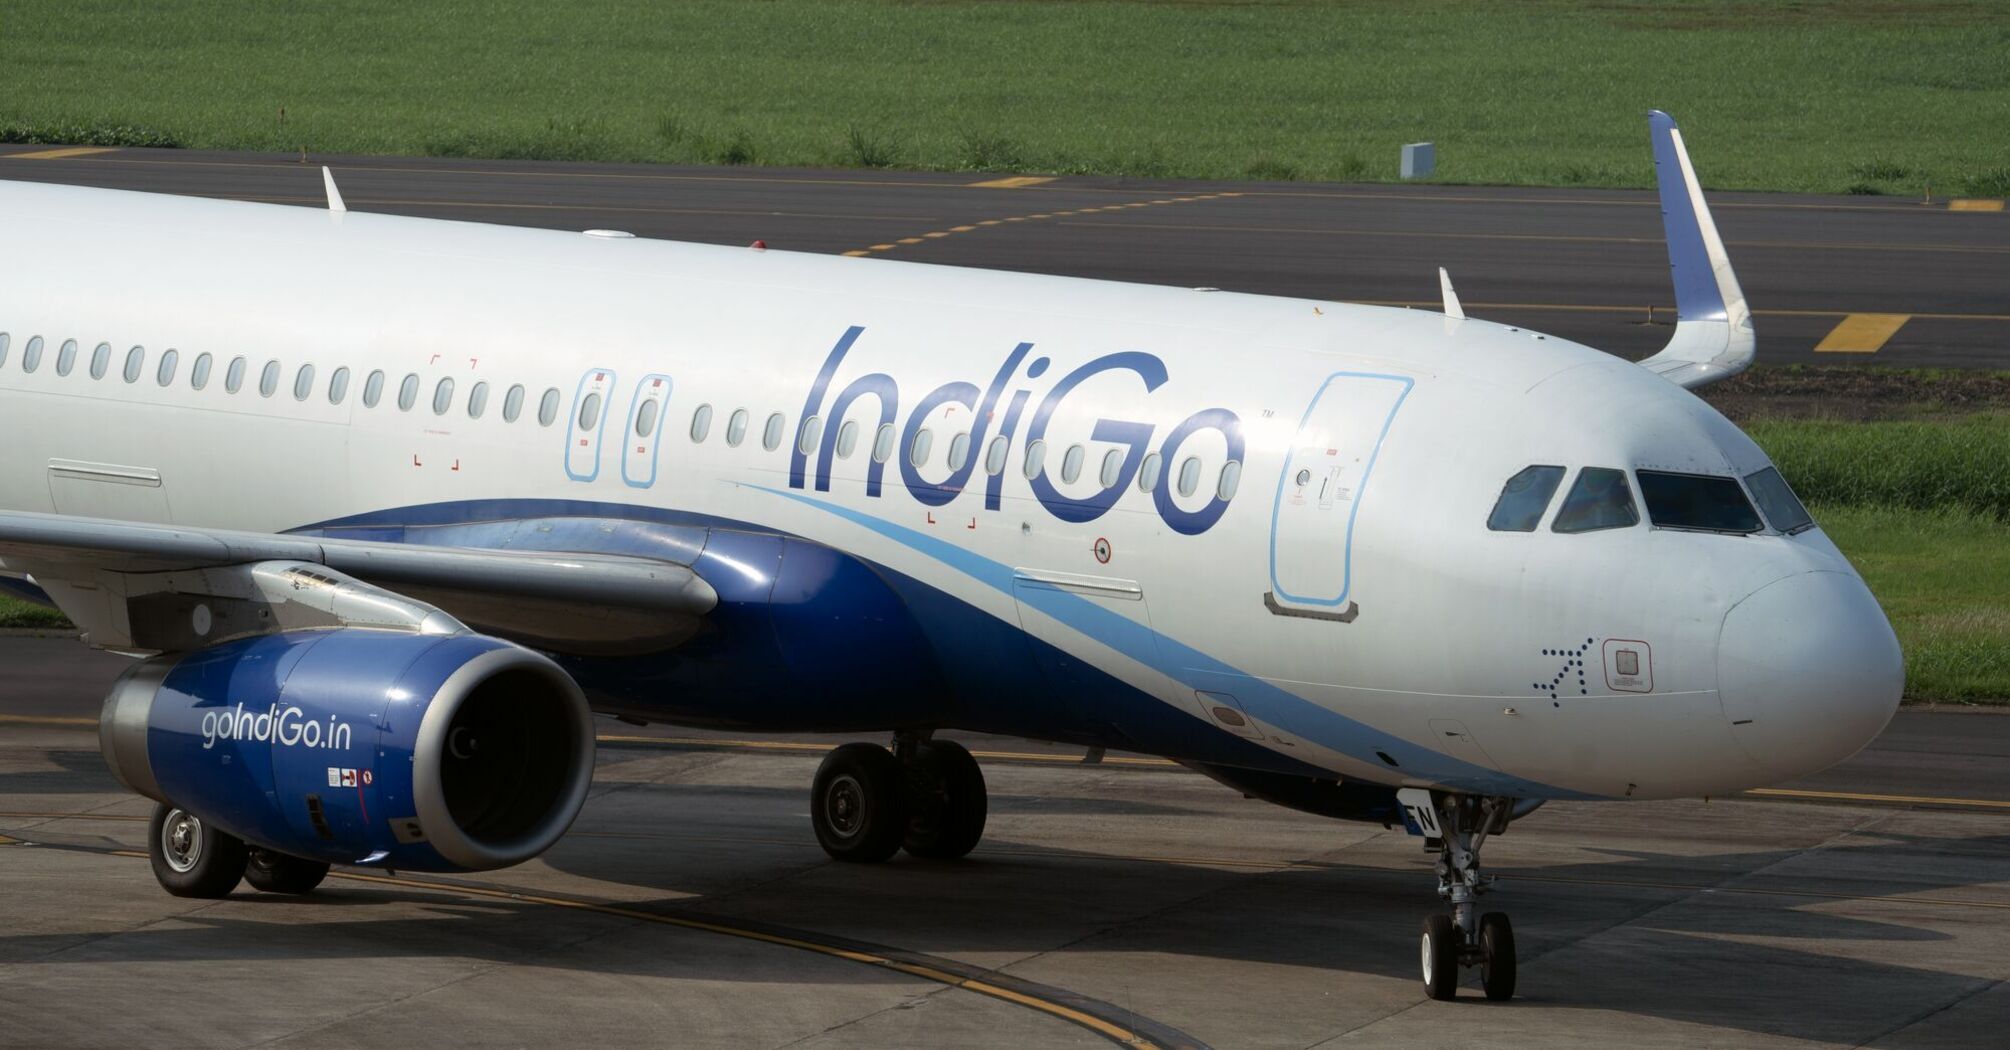 IndiGo commercial aircraft on the tarmac with the company logo visible on the fuselage